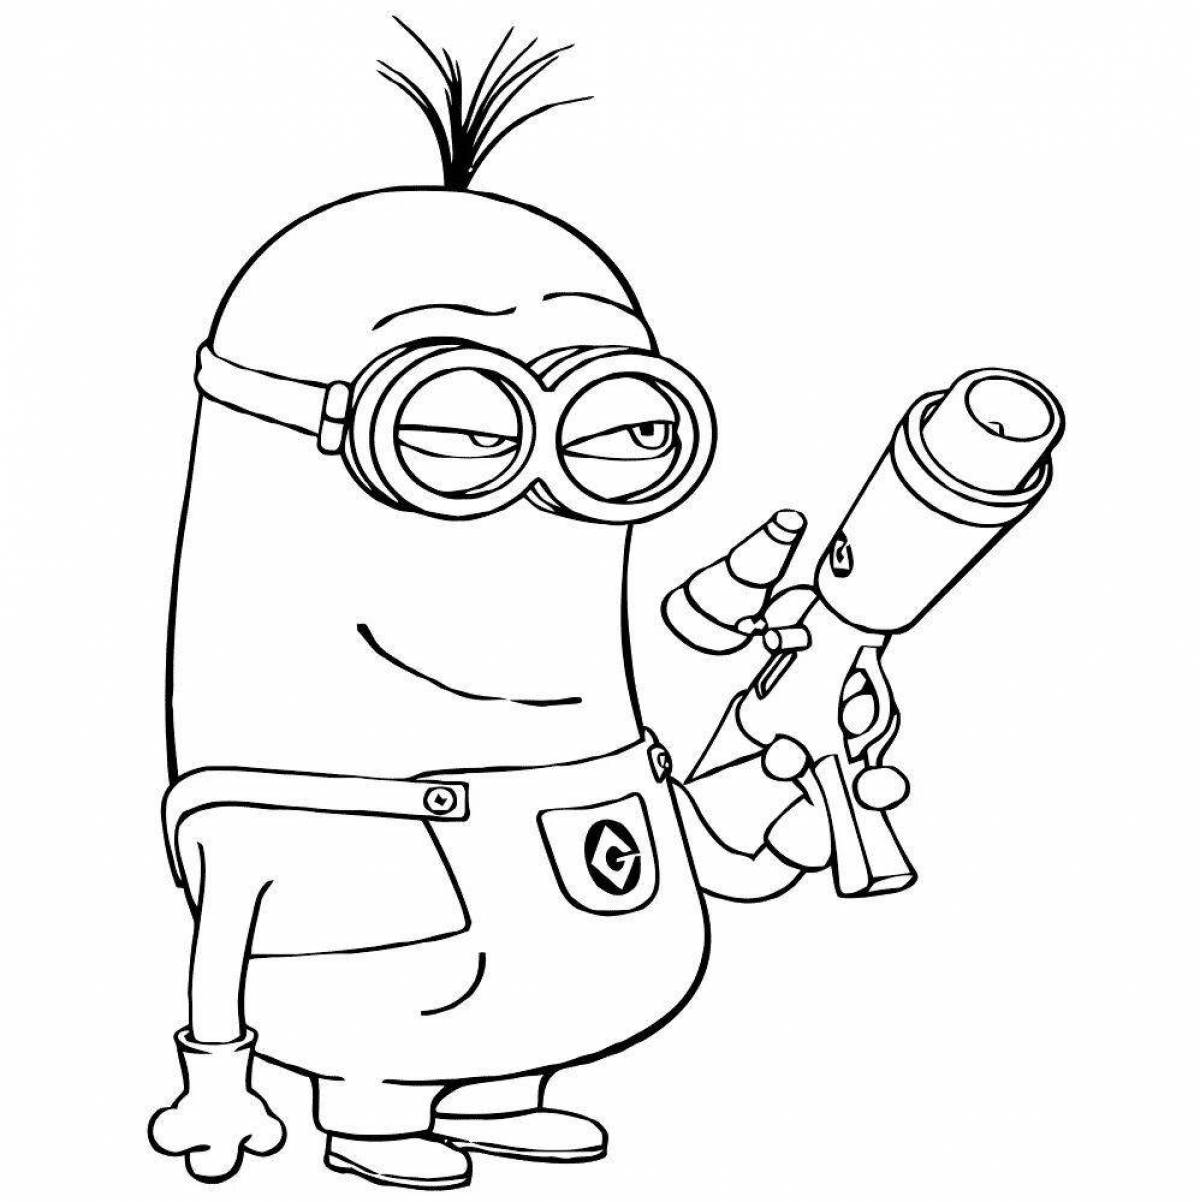 A wonderful minion coloring book for kids